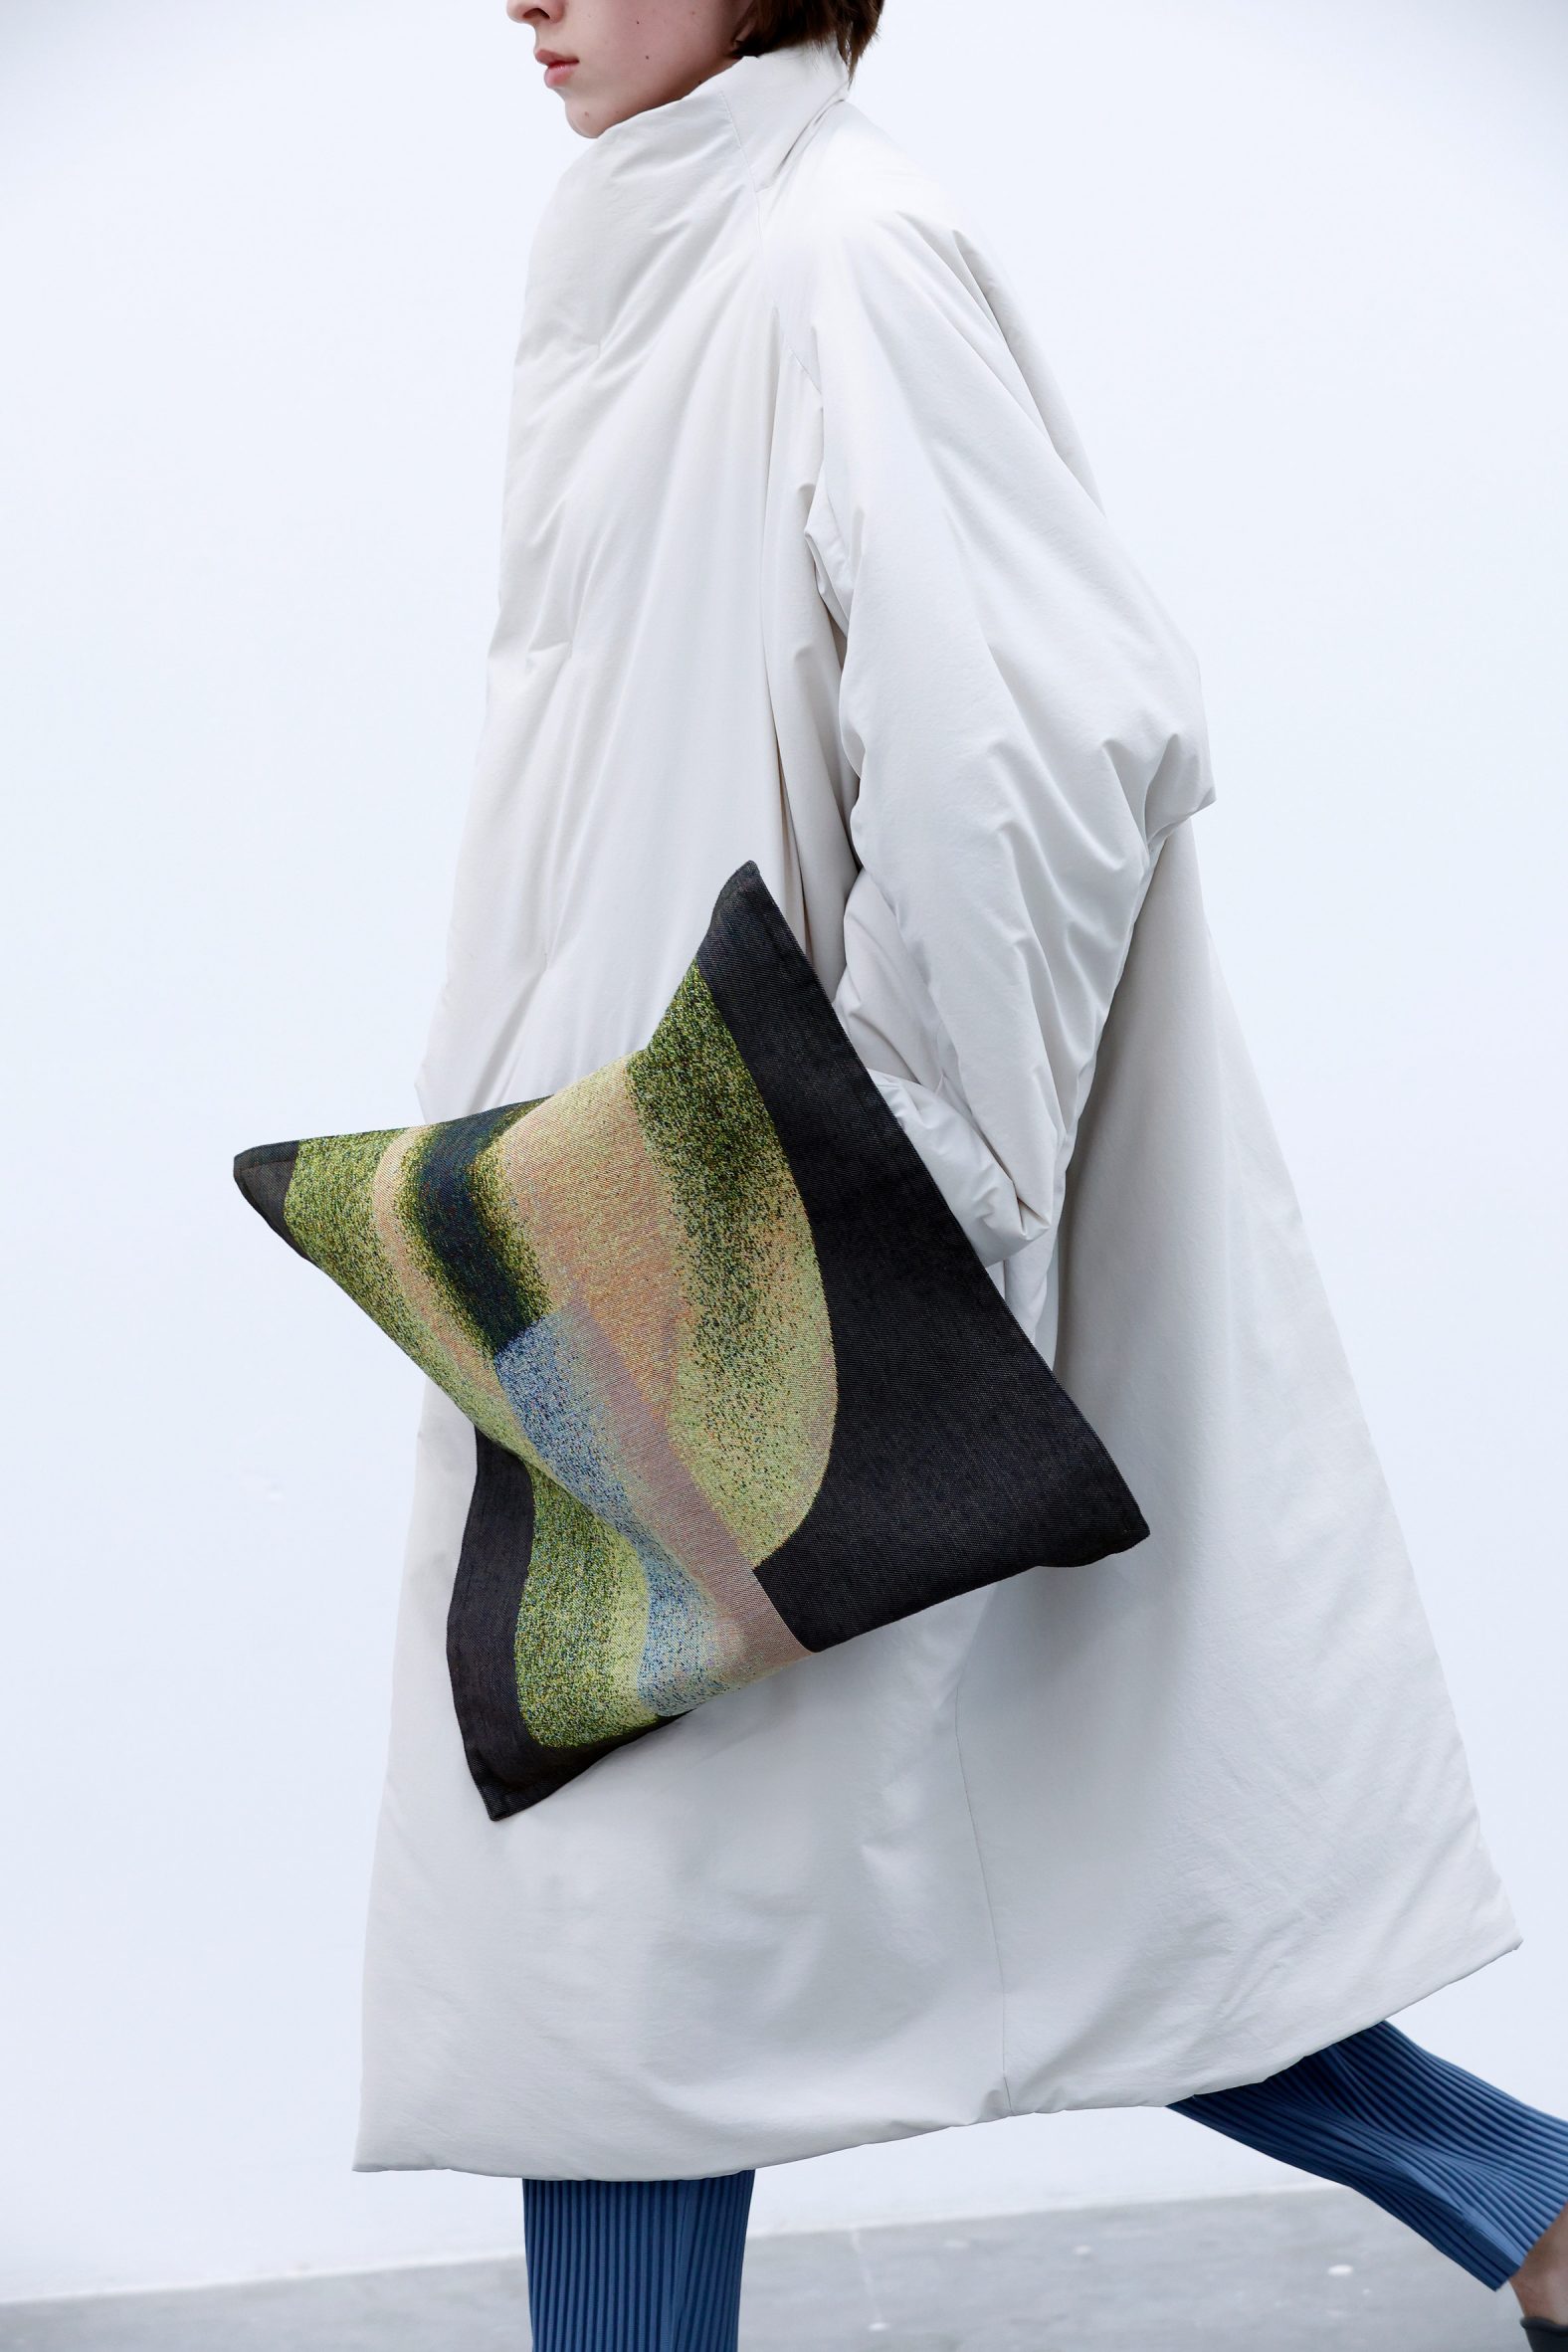 Puffer coat with giant oversized pocket from fashion collection in collaboration with Ronan Bouroullec